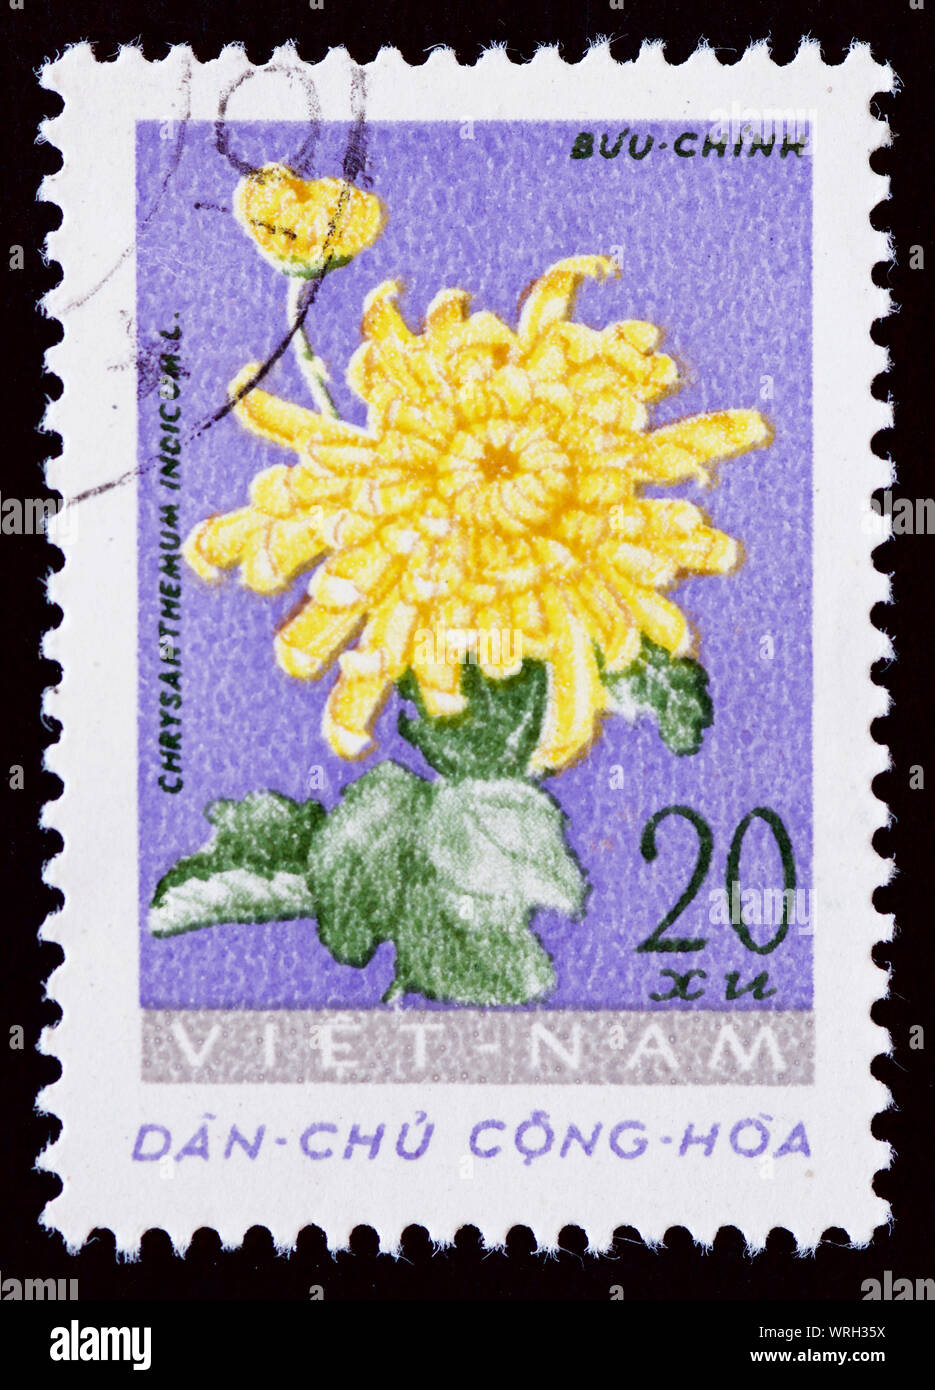 Vietnam Postage Stamp - Spring and Summer Flowers Stock Photo - Alamy